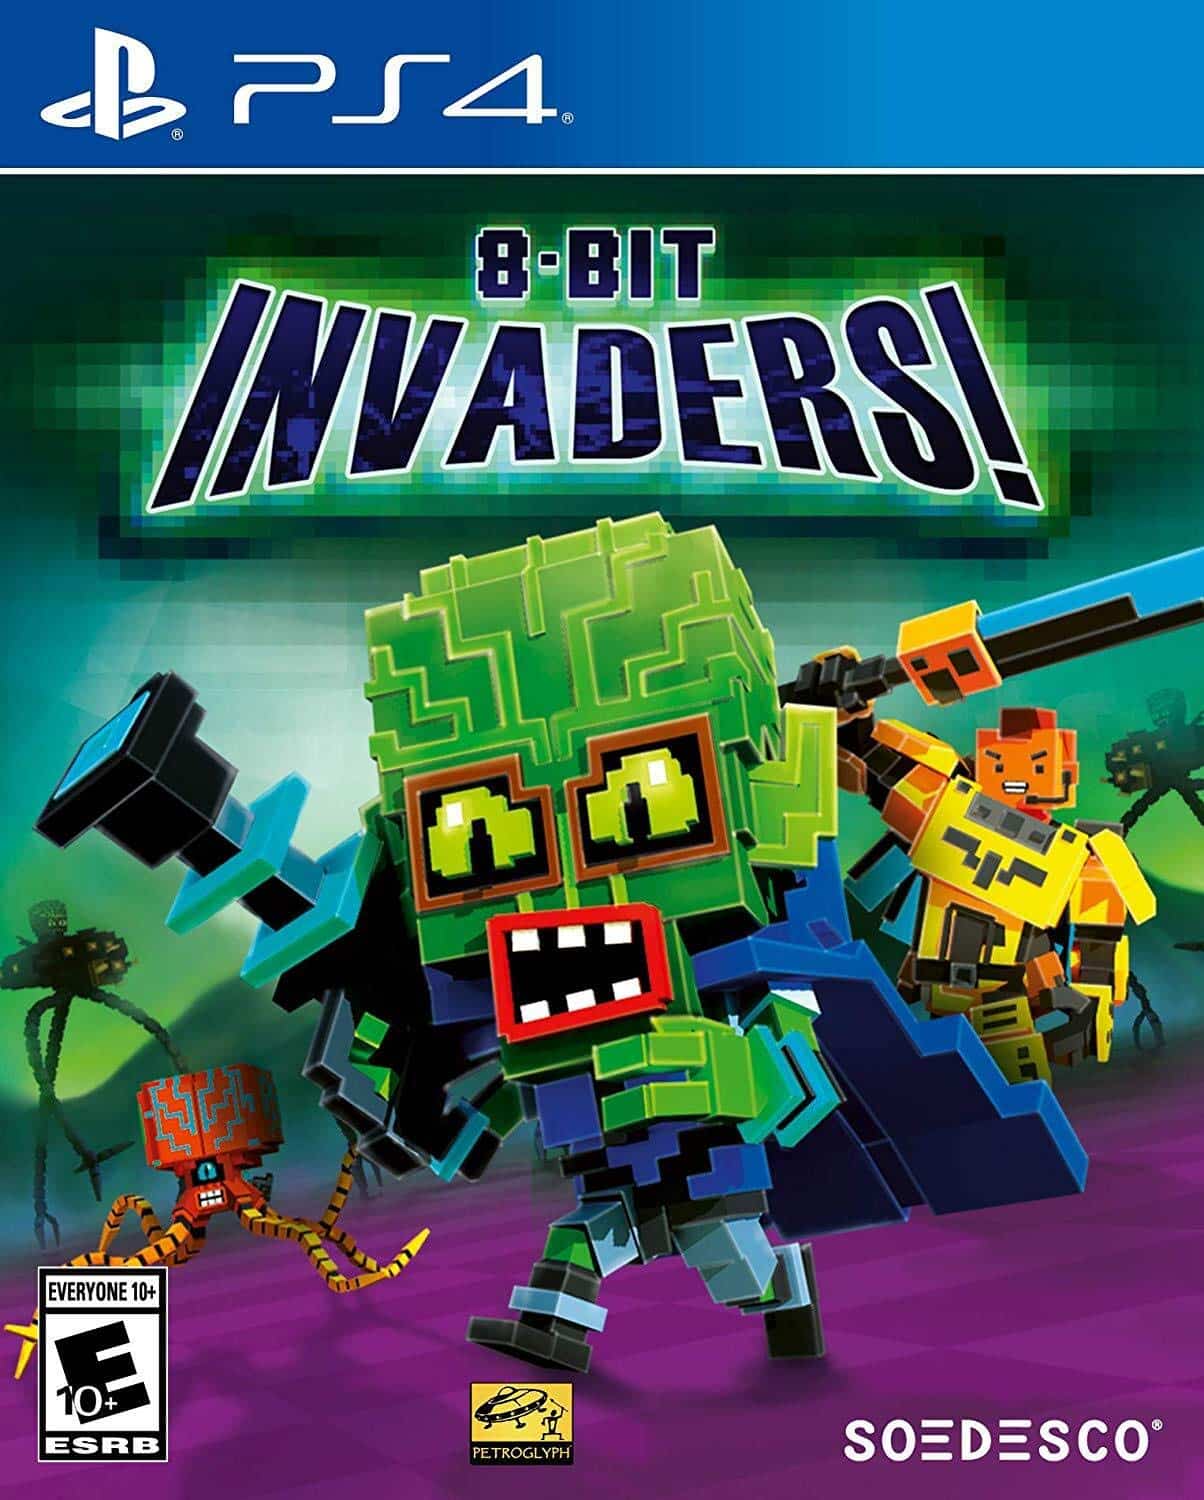 8-Bit Invaders player count stats